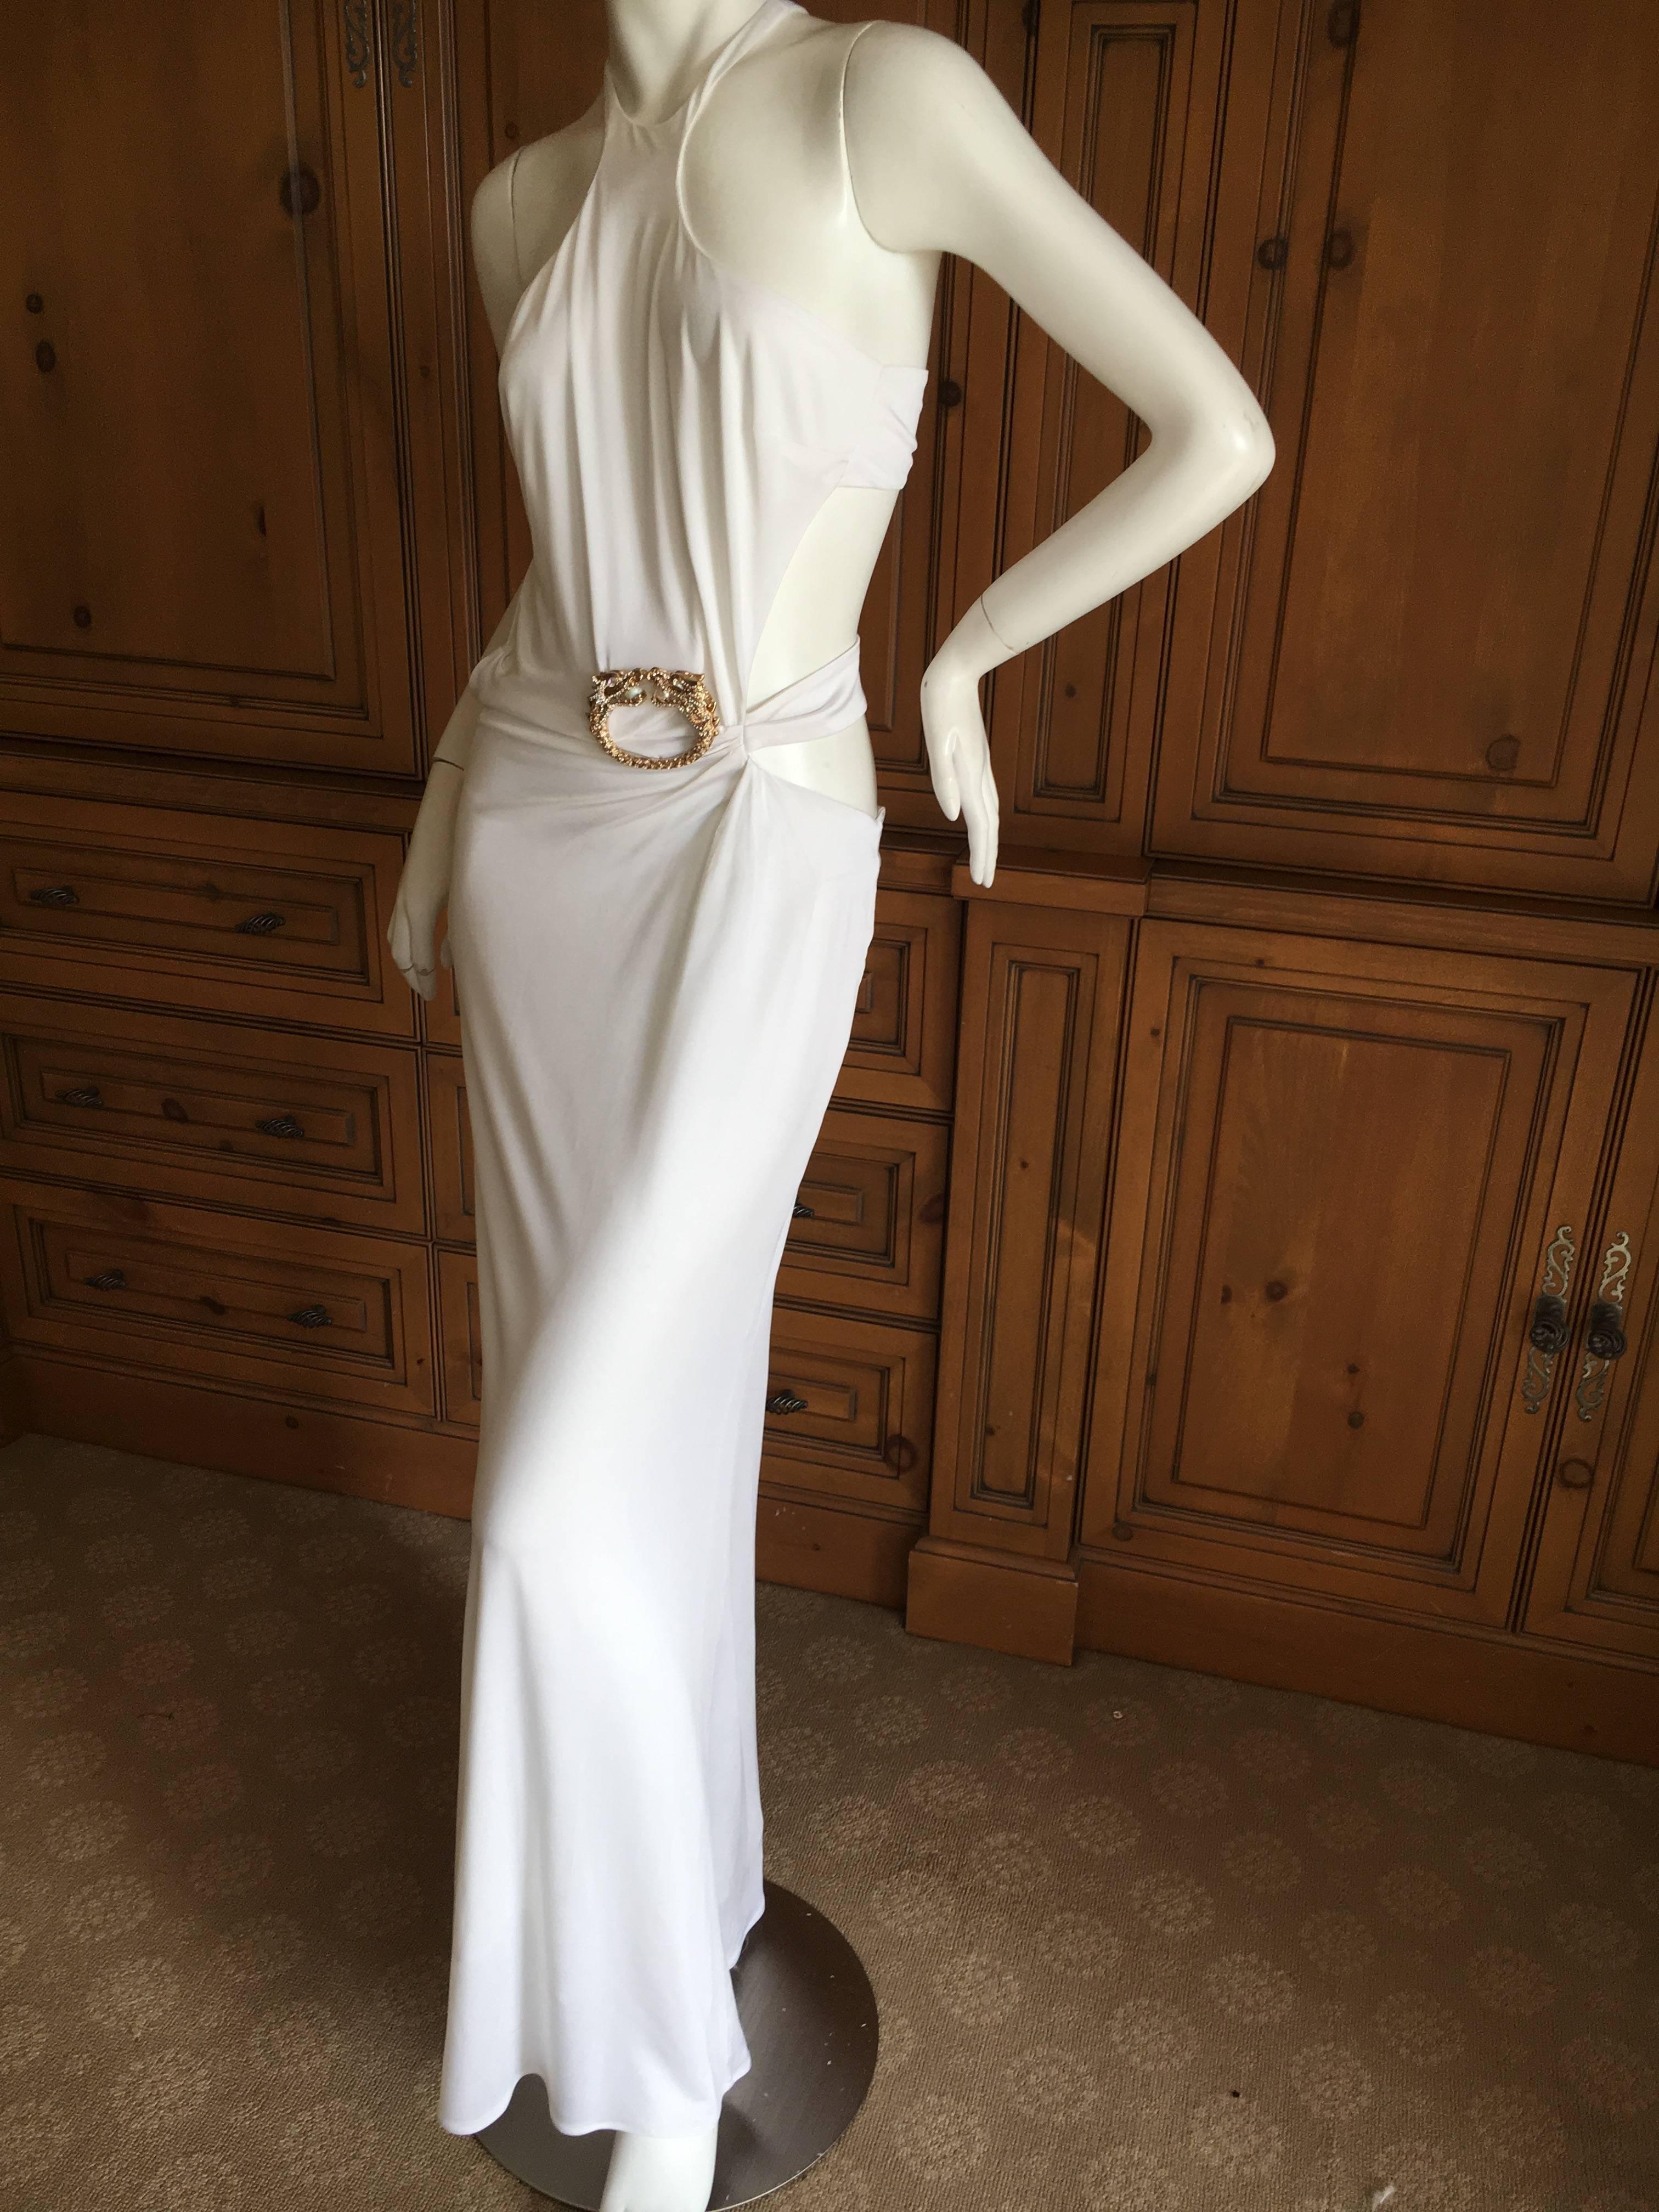 Gucci by Tom Ford 2004  Ad Campaign White Halter Dress with Jewel Dragon 1